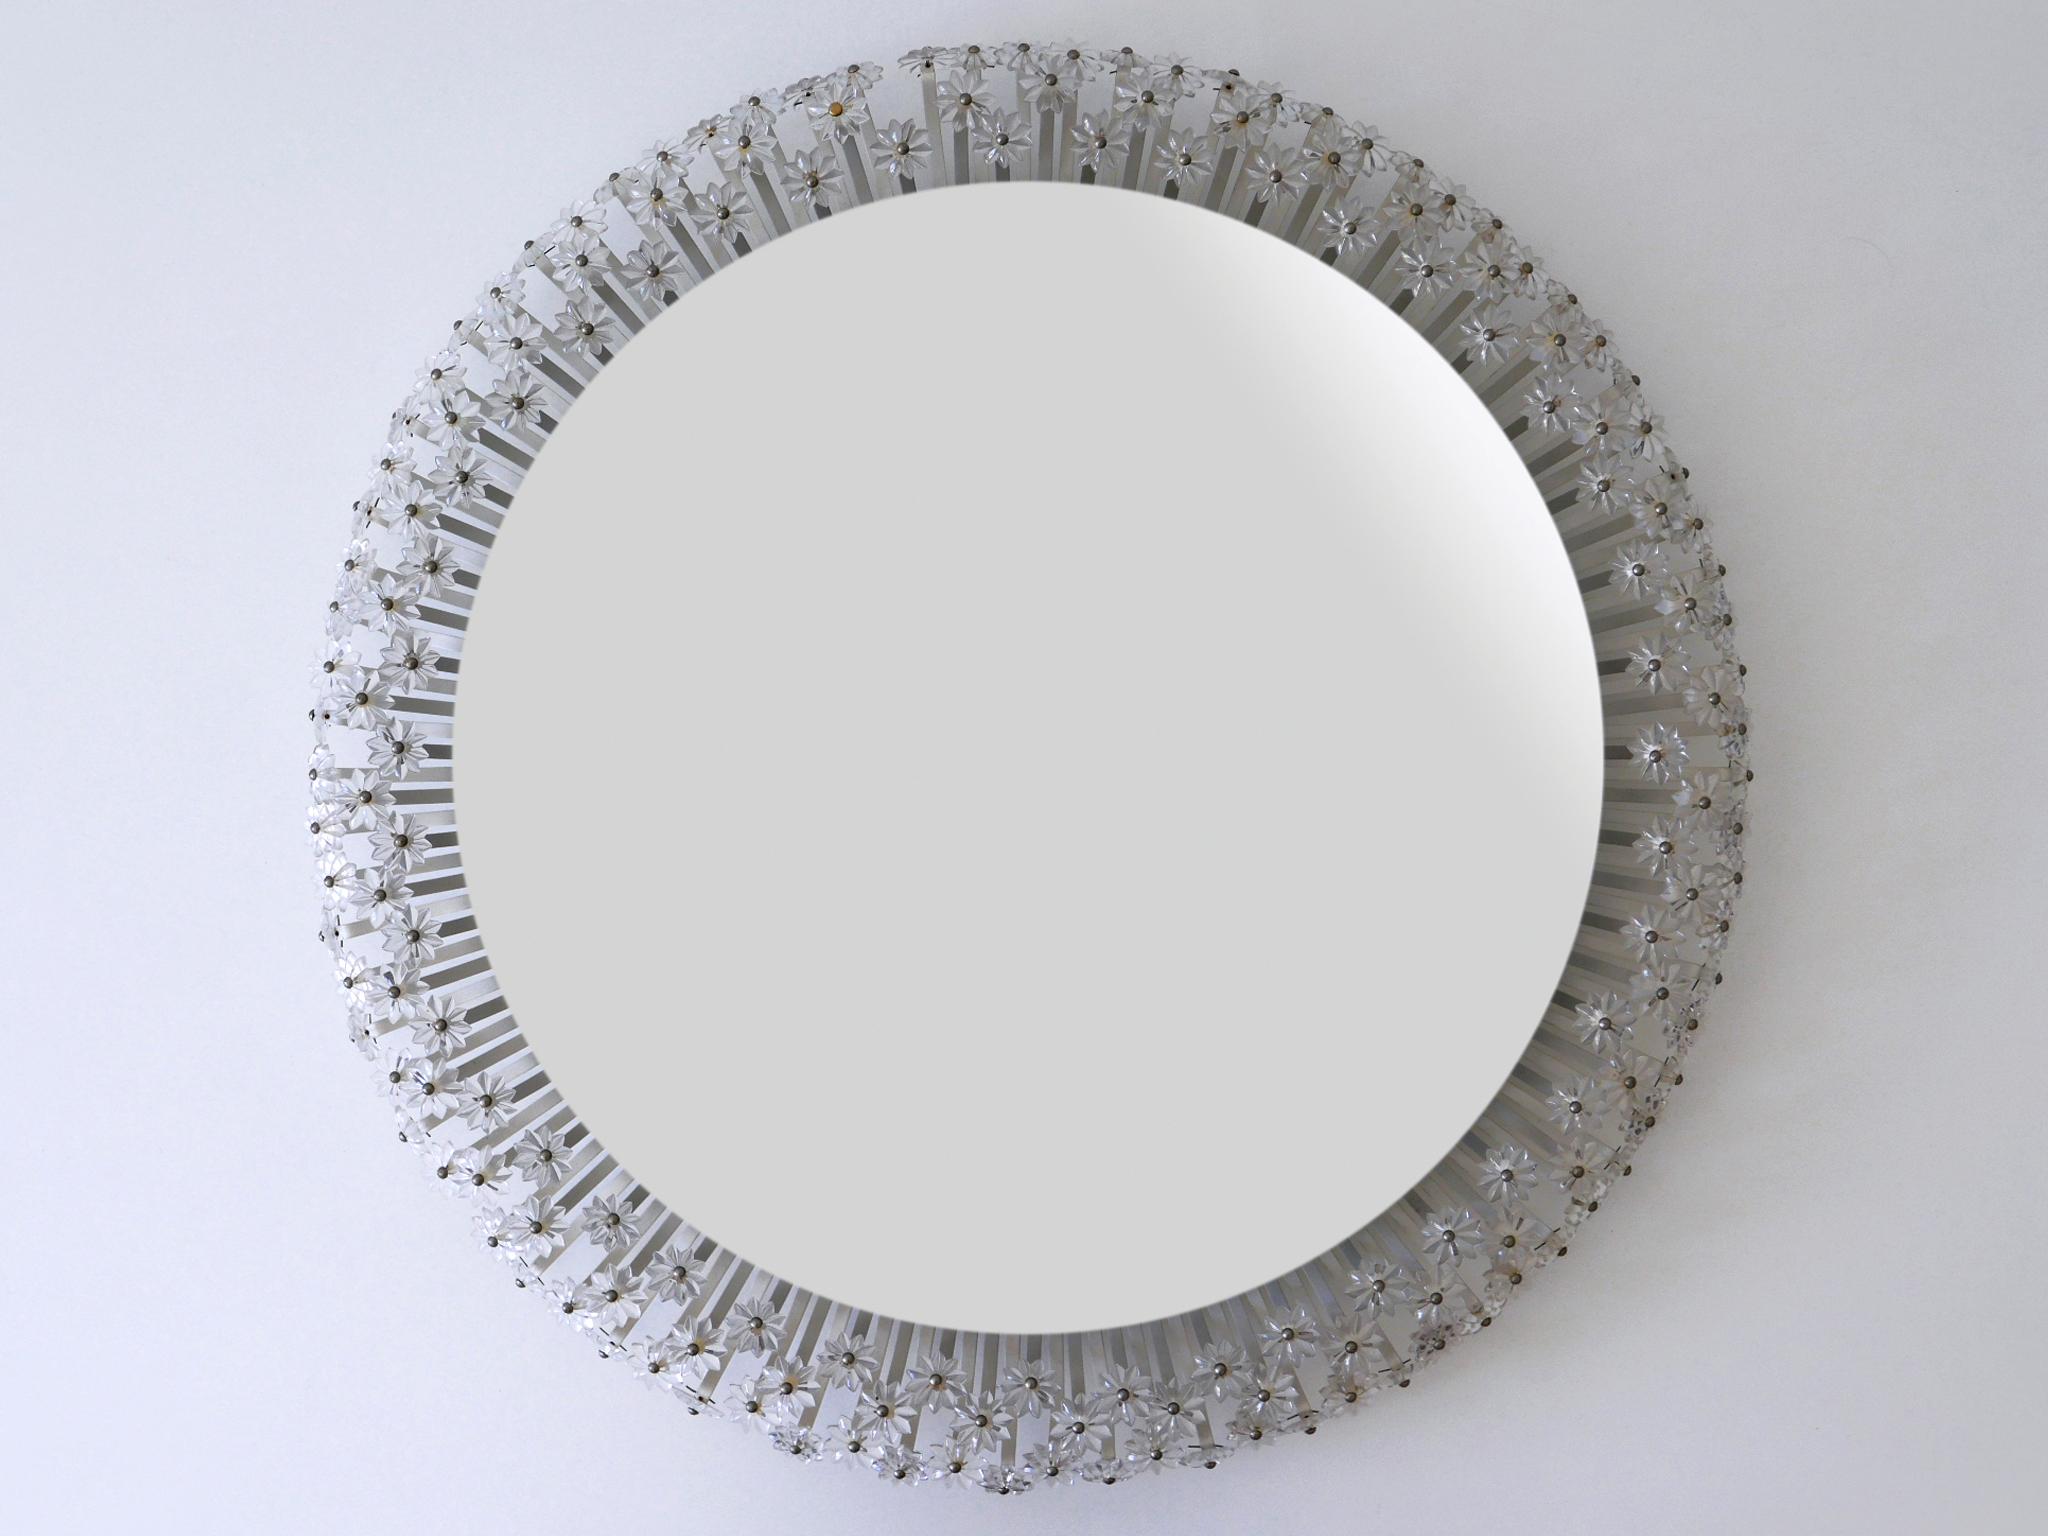 A real gem for your home! Large, lovely and highly decorative Mid-Century Modern circular backlit wall mirror with acrylic flowers. Manufactured by Schöninger, Germany, 1960s

It makes a breath-taking effect when it is on!.

Executed in clear